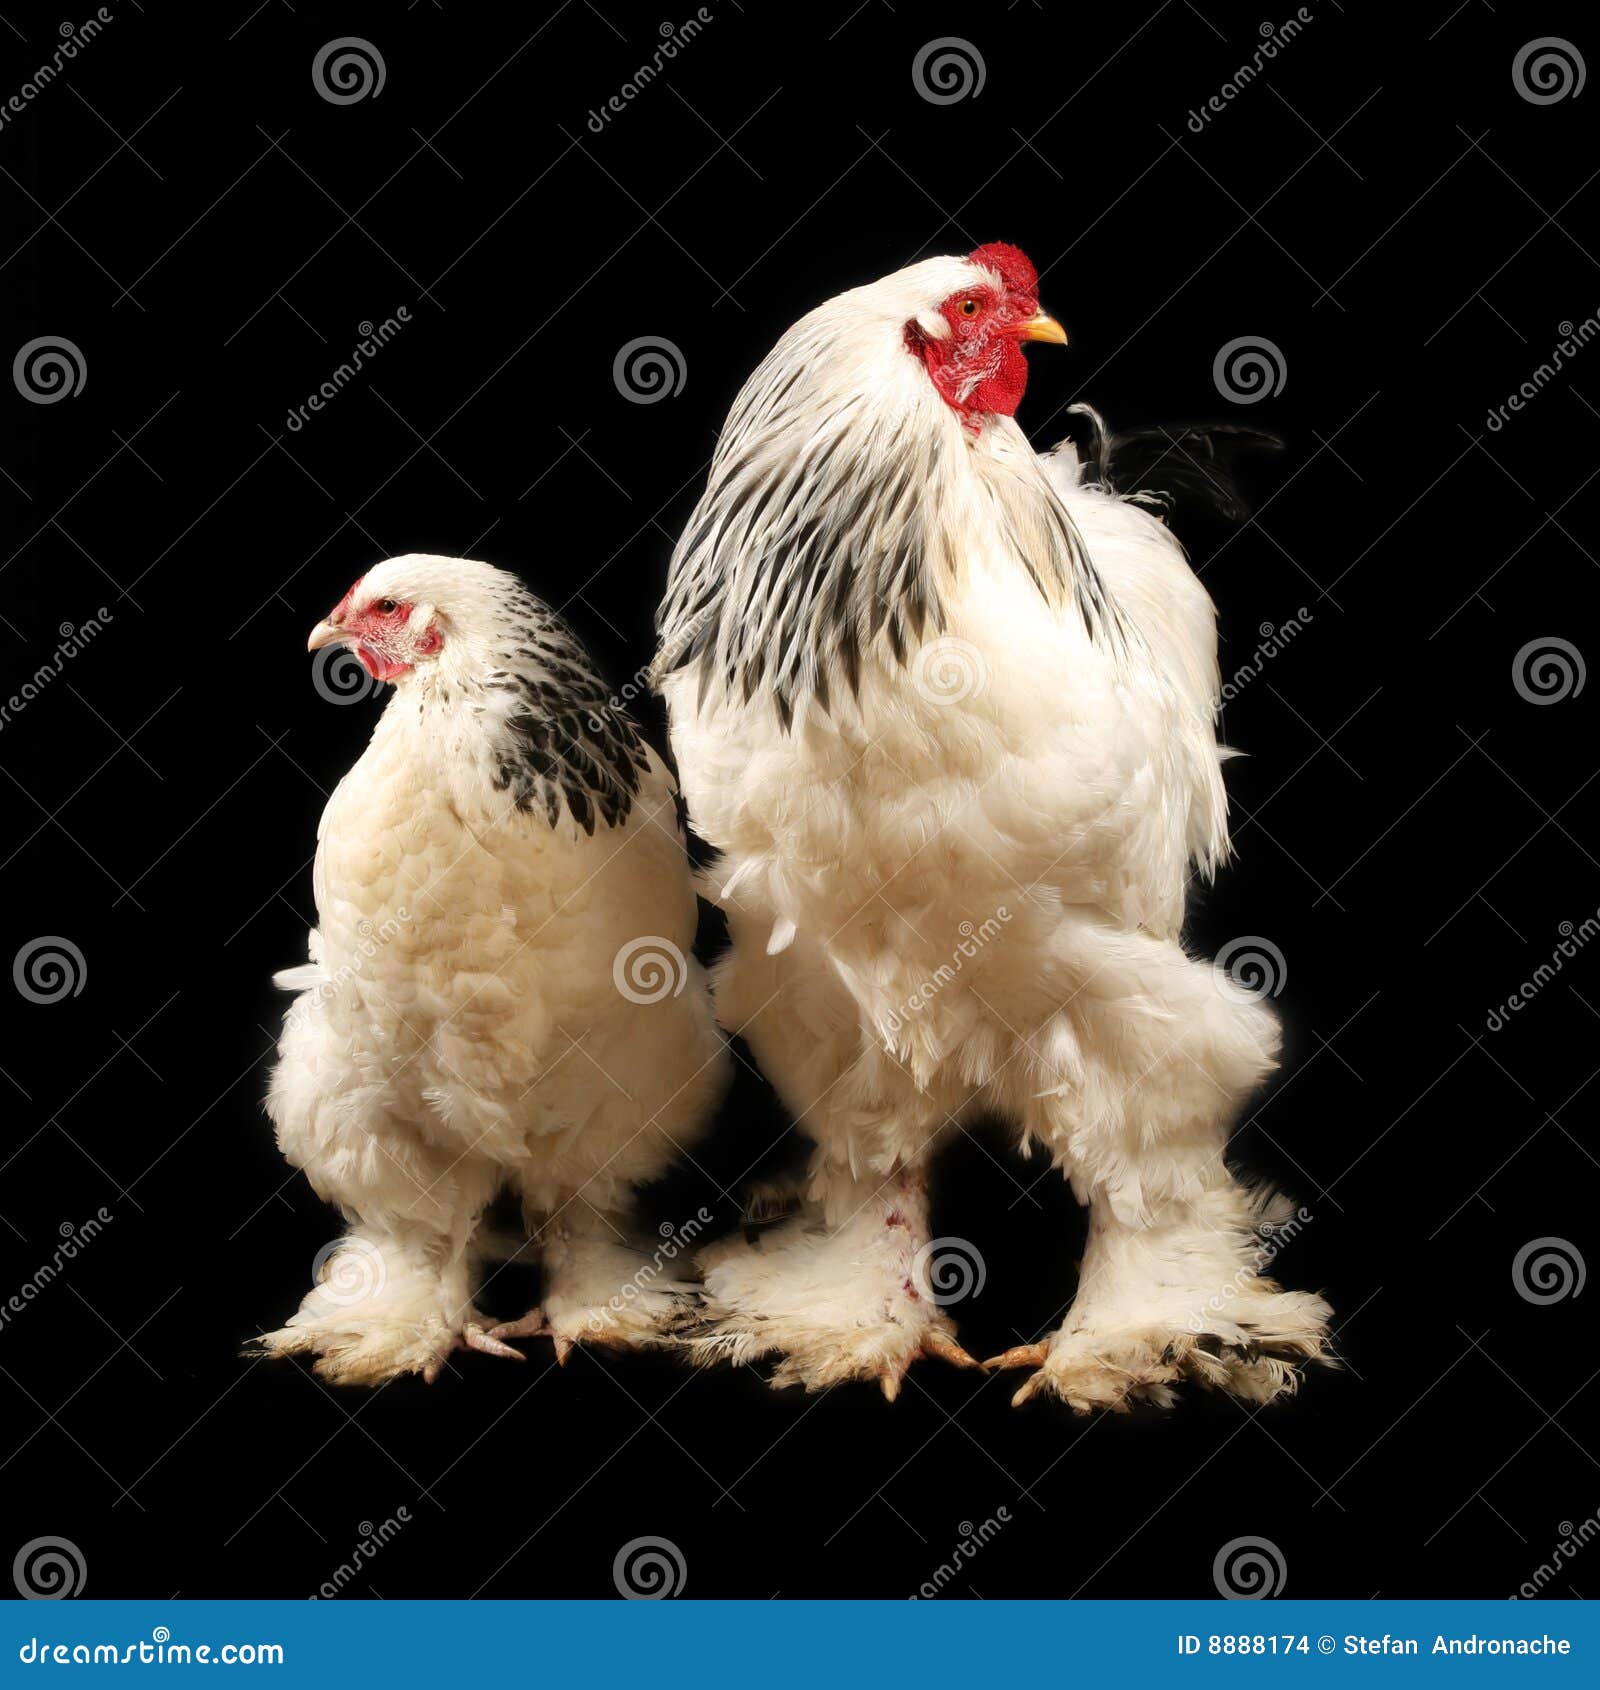 A very large Brahma chicken with an arco red comb on its head and